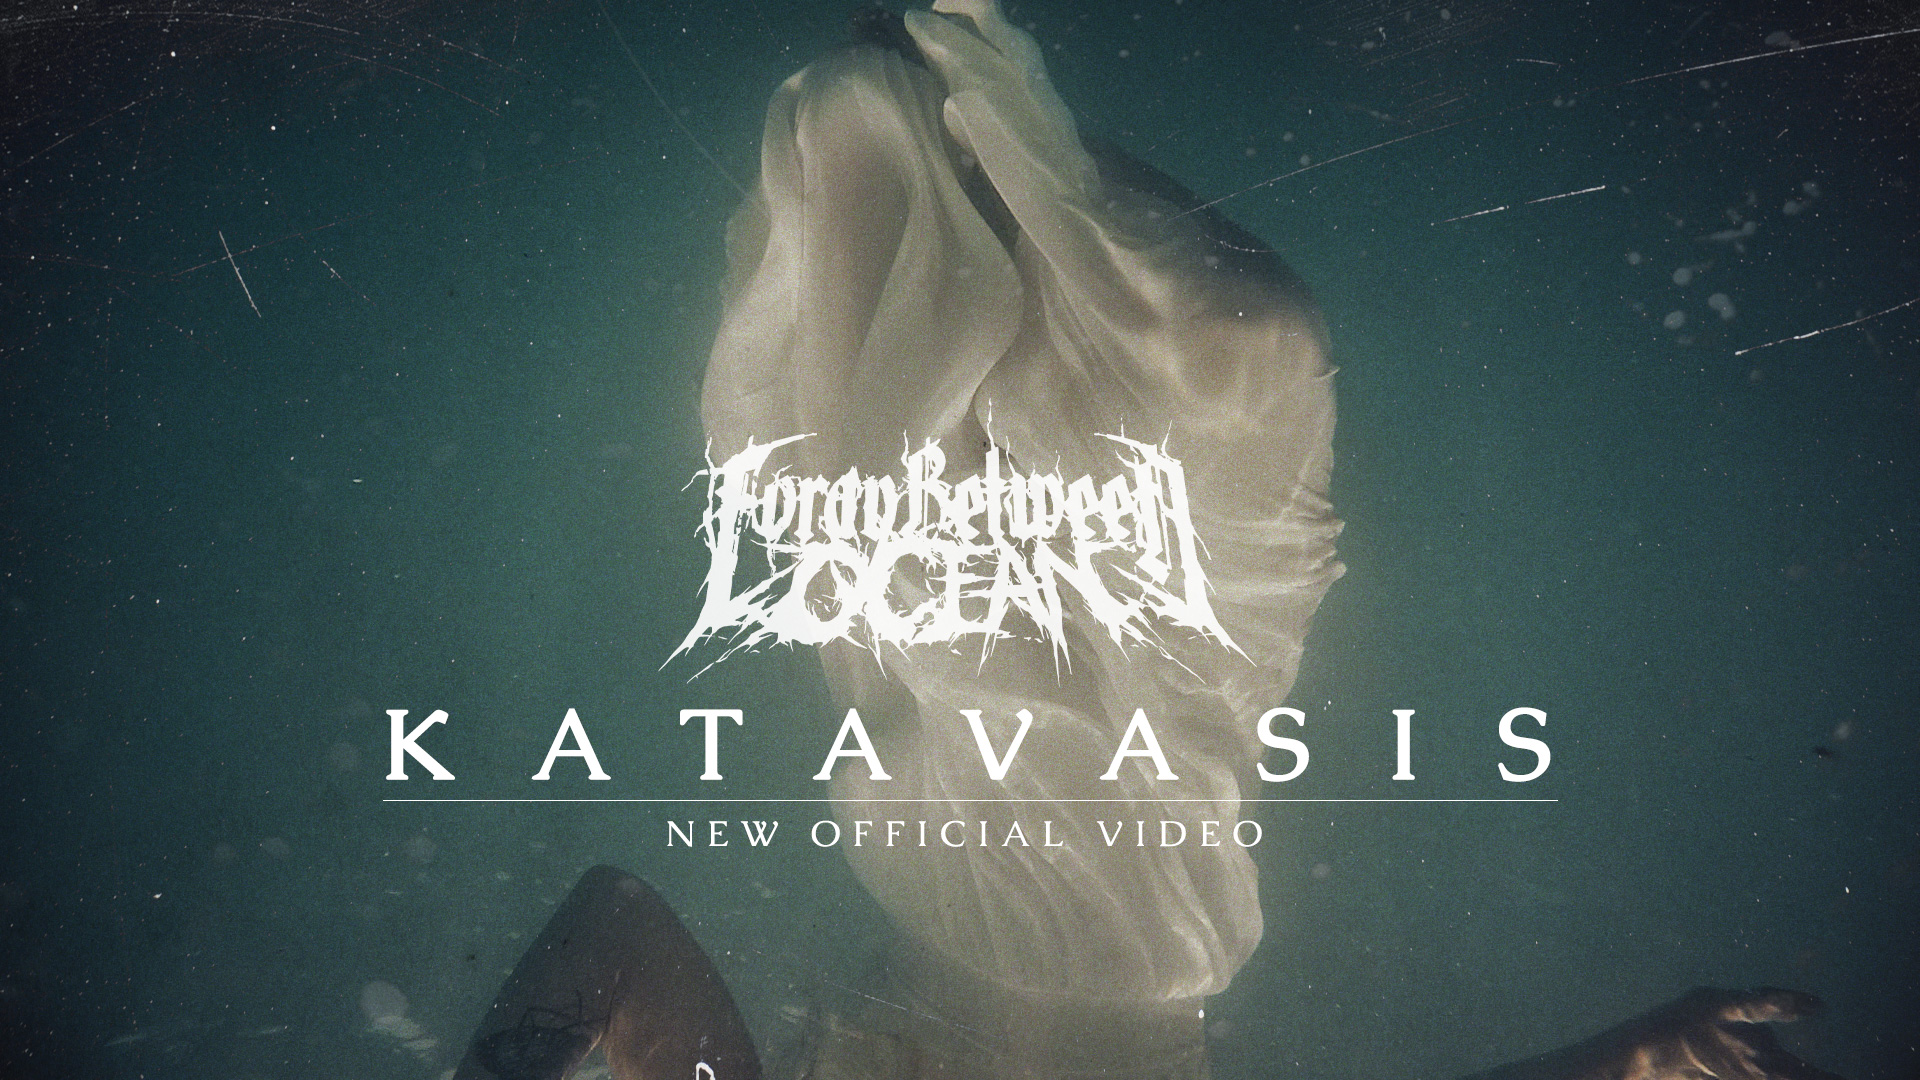 You are currently viewing FORAY BETWEEN OCEAN has released a new video clip for the song “Katavasis”